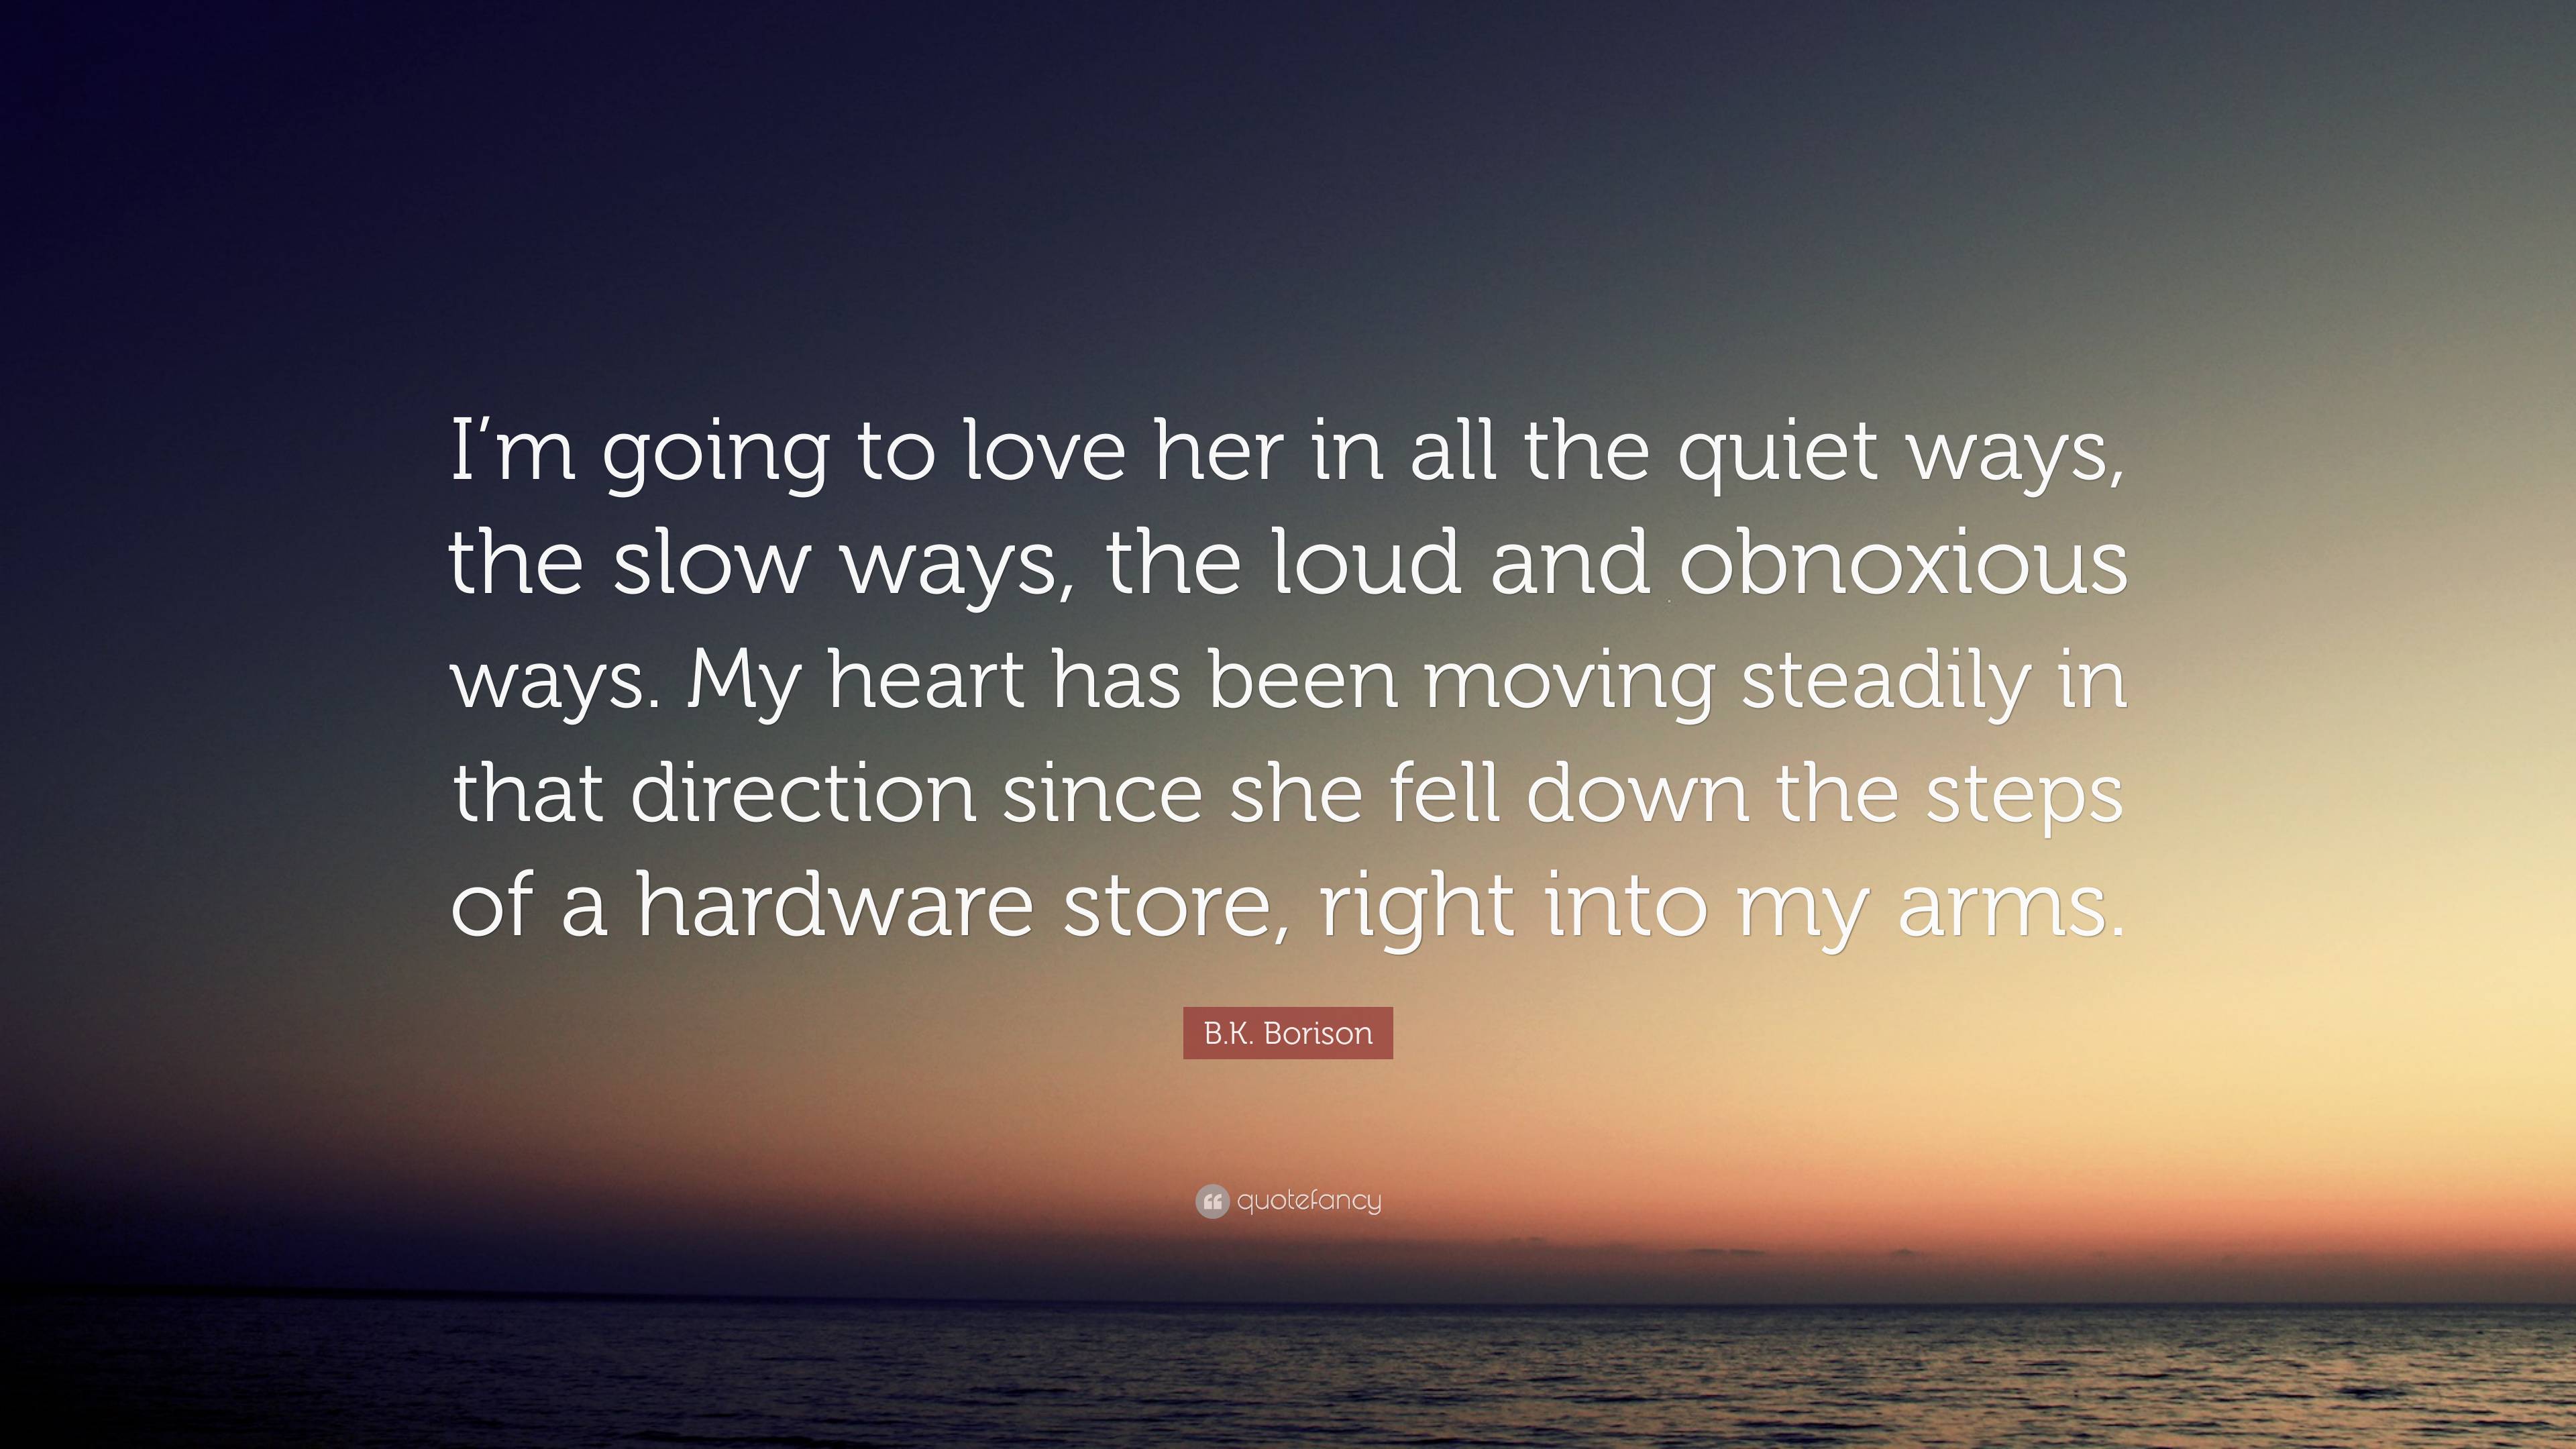 B.K. Borison Quote: “I'm going to love her in all the quiet ways, the slow  ways, the loud and obnoxious ways. My heart has been moving steadi...”